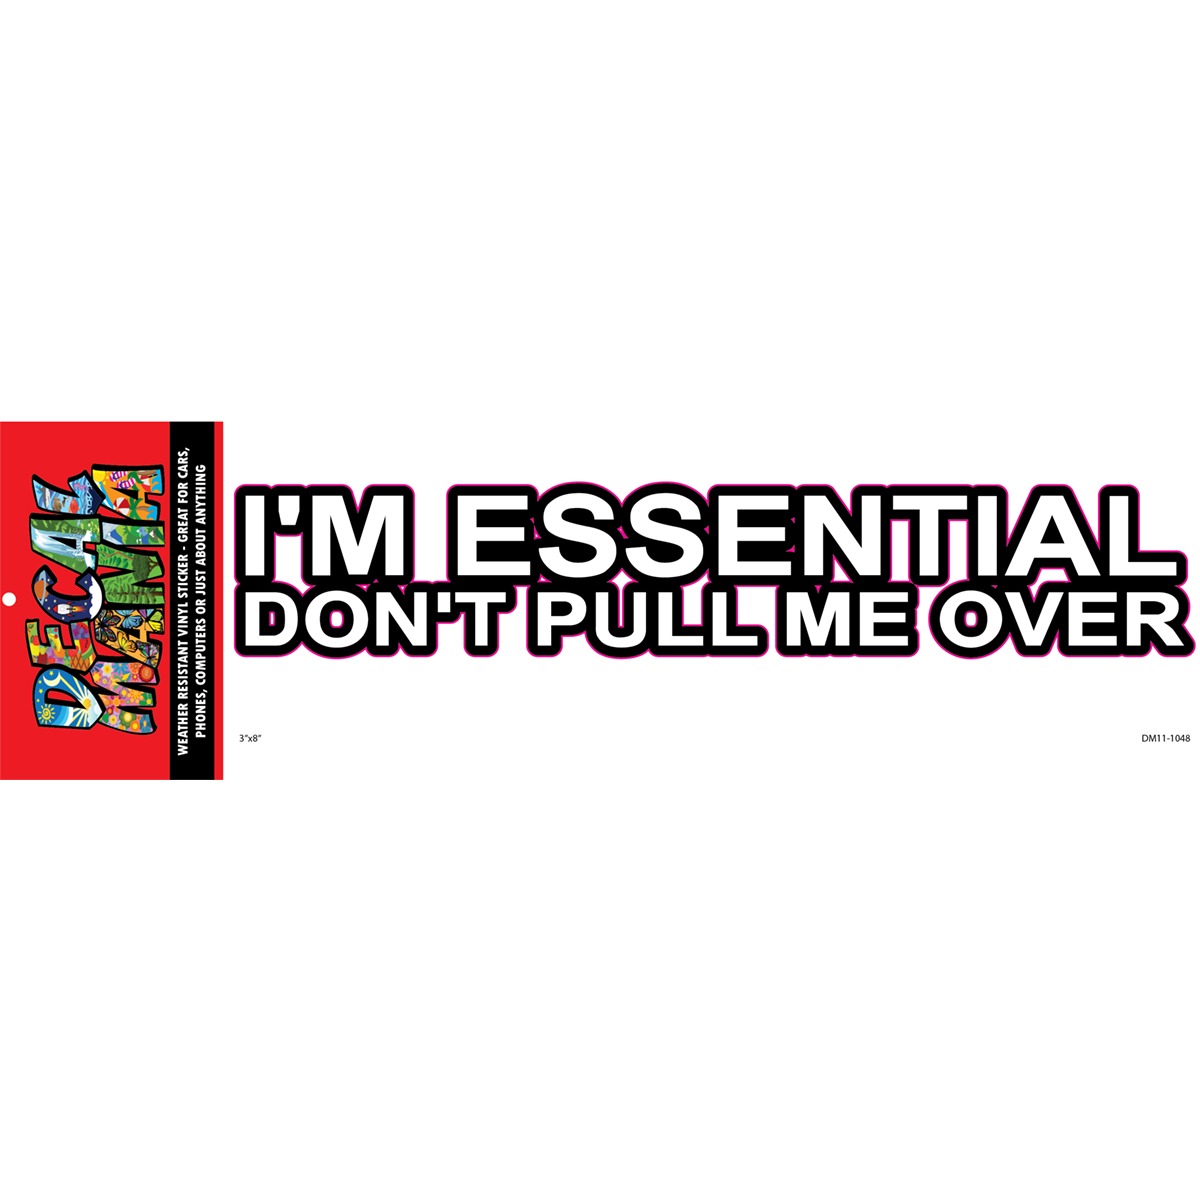 Decal Im Essential Dont Pull Me 1PK 8IN